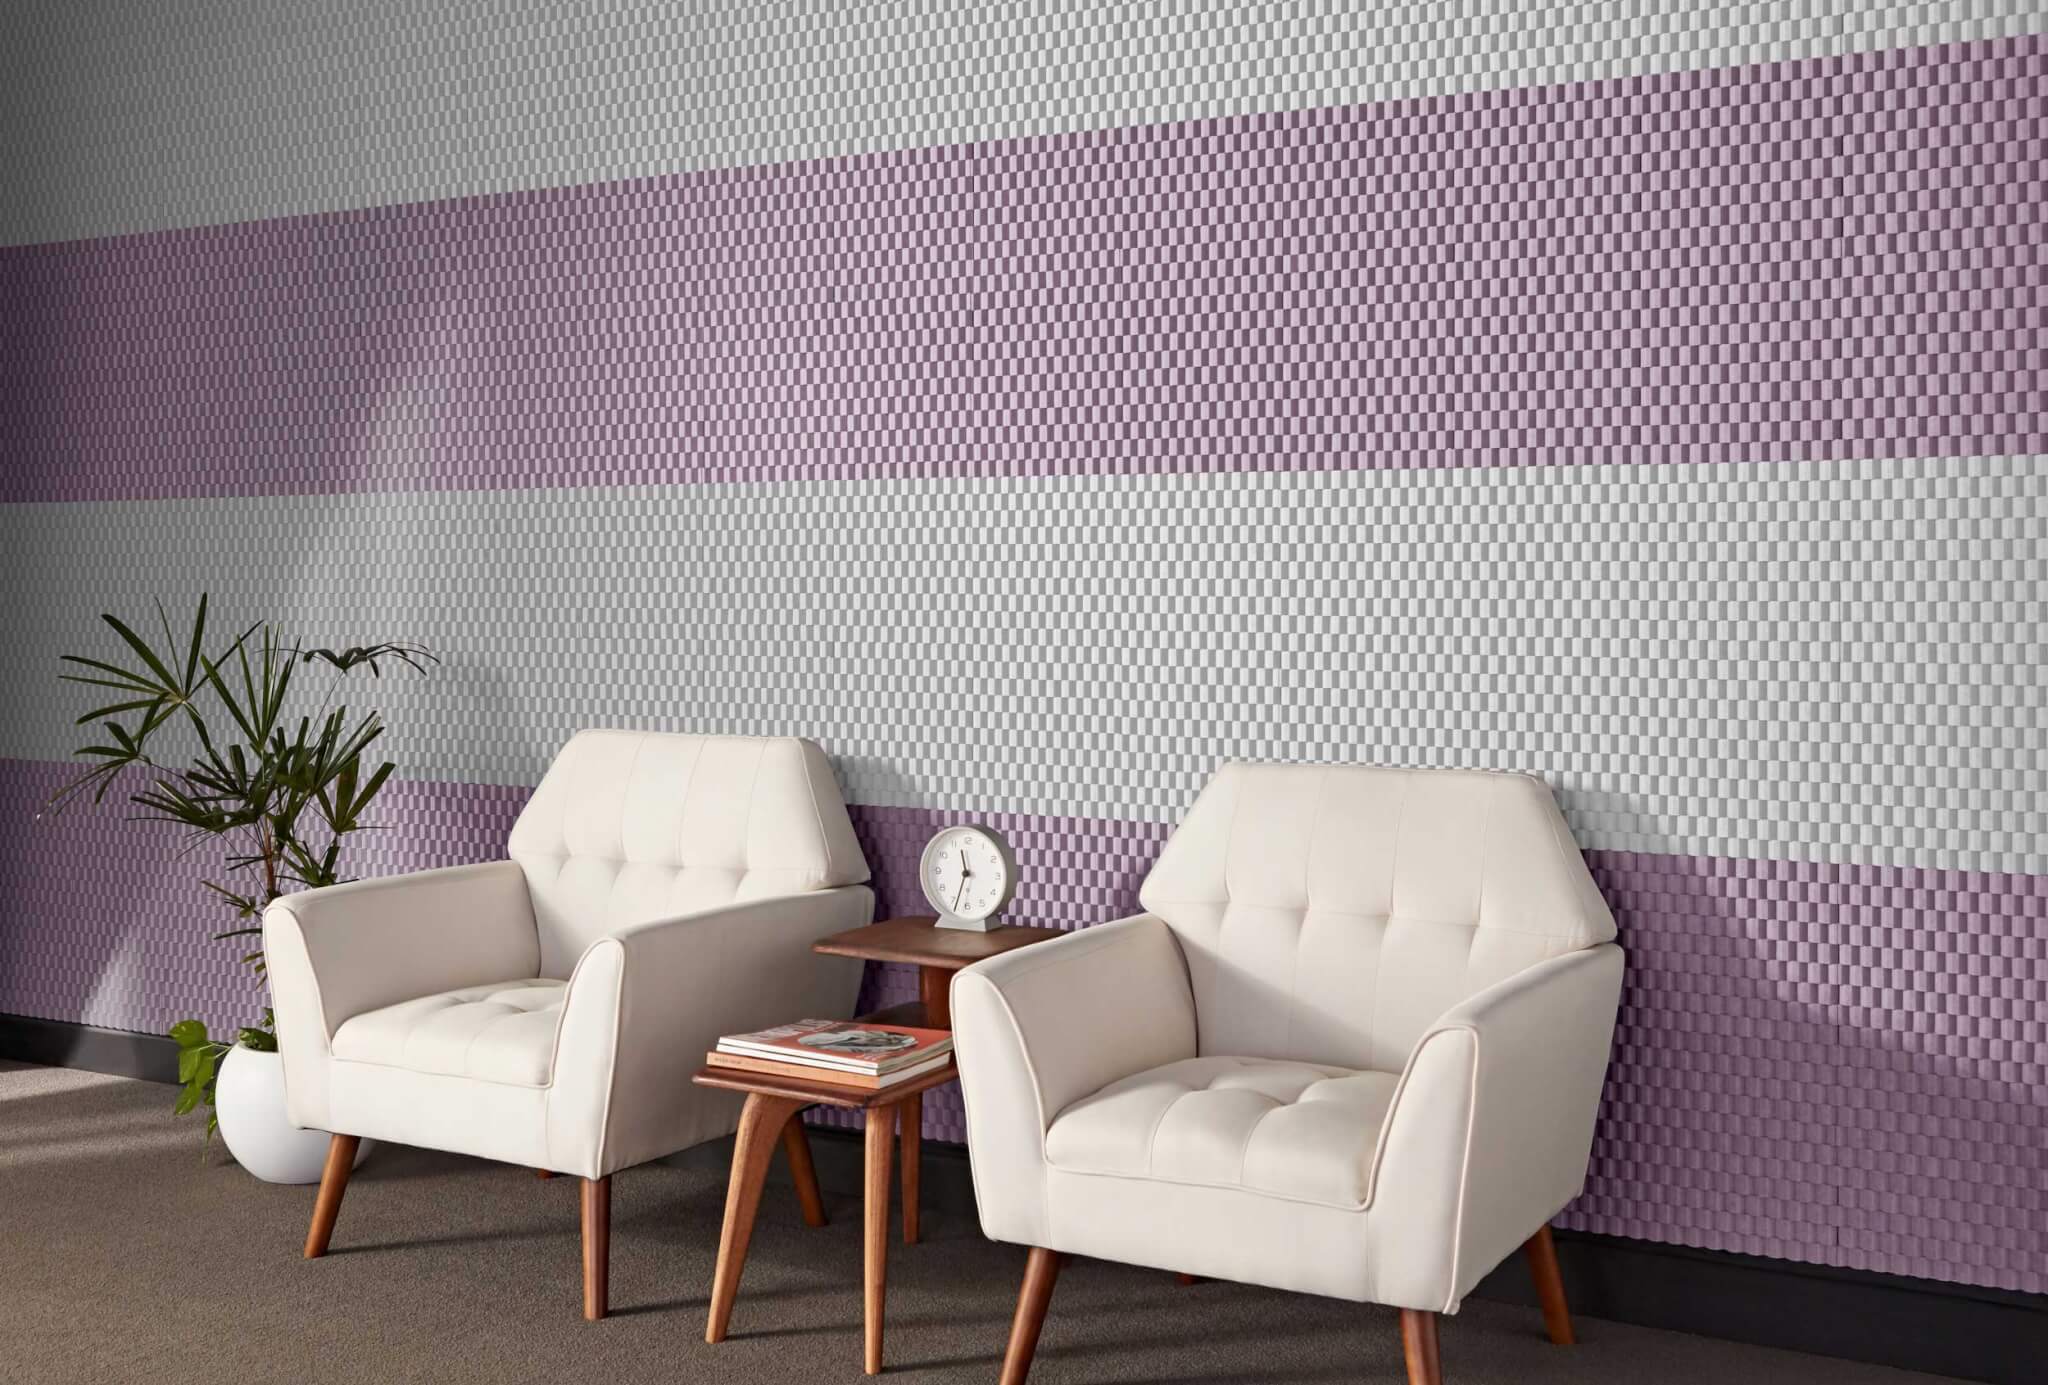 chairs against purple wall